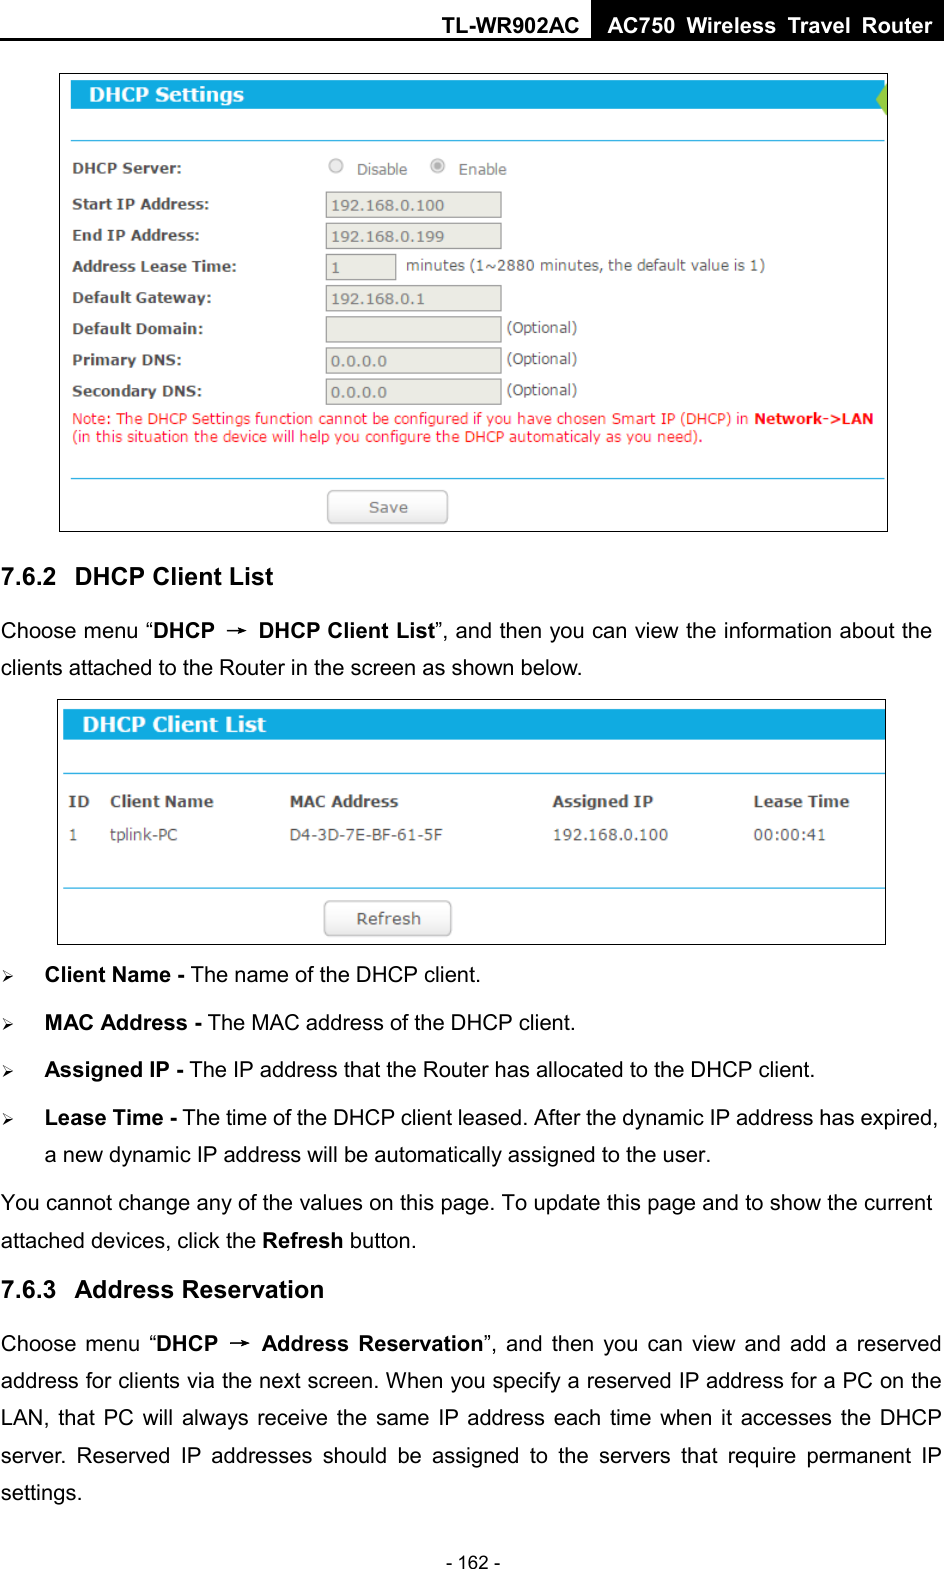 TL-WR902AC AC750  Wireless Travel Router  - 162 -  7.6.2 DHCP Client List Choose menu “DHCP → DHCP Client List”, and then you can view the information about the clients attached to the Router in the screen as shown below.   Client Name - The name of the DHCP client.    MAC Address - The MAC address of the DHCP client.    Assigned IP - The IP address that the Router has allocated to the DHCP client.  Lease Time - The time of the DHCP client leased. After the dynamic IP address has expired, a new dynamic IP address will be automatically assigned to the user.     You cannot change any of the values on this page. To update this page and to show the current attached devices, click the Refresh button. 7.6.3 Address Reservation Choose menu “DHCP → Address Reservation”, and then you can view and add a reserved address for clients via the next screen. When you specify a reserved IP address for a PC on the LAN, that PC will always receive the same IP address each time when it accesses the DHCP server. Reserved IP addresses should be assigned to the  servers  that require permanent IP settings.   